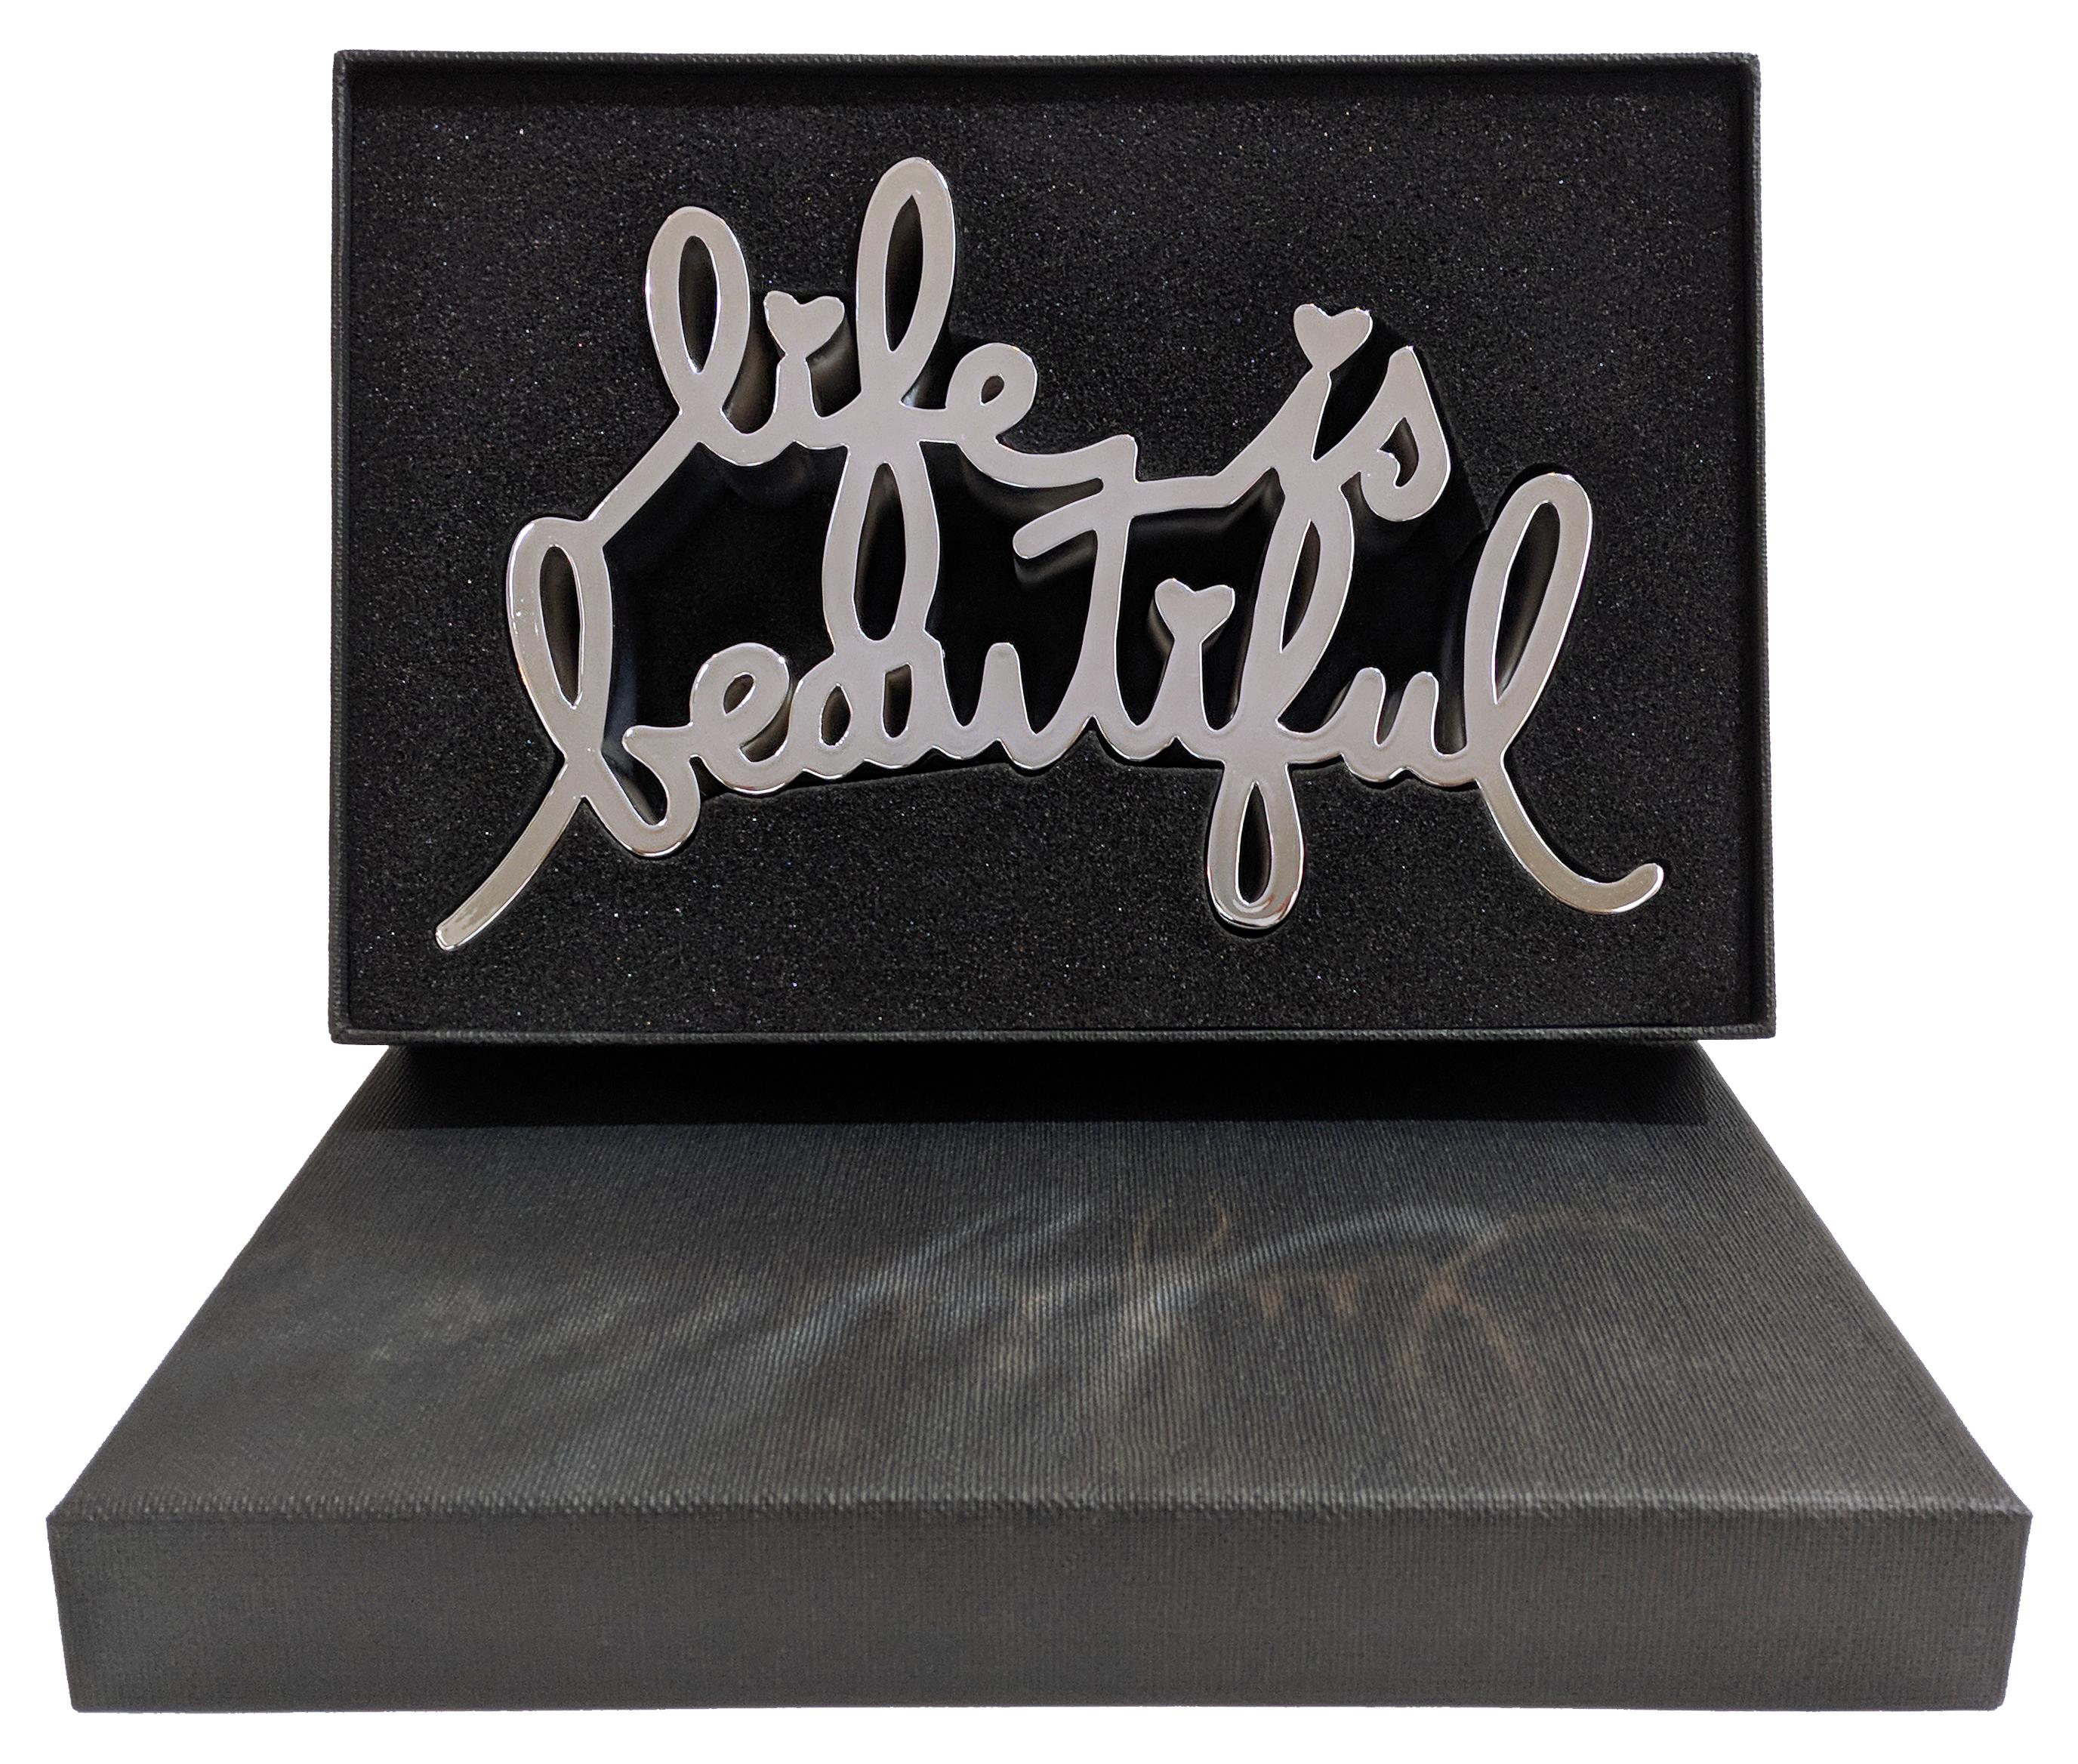 Hand signed, numbered and dated on bottom by the artist. Edition of 100.  The Life is Beautiful sculpture is made from durable cast resin, thermal coated with reflective metallic finish. Includes original box and plexiglass display.   Artwork is in